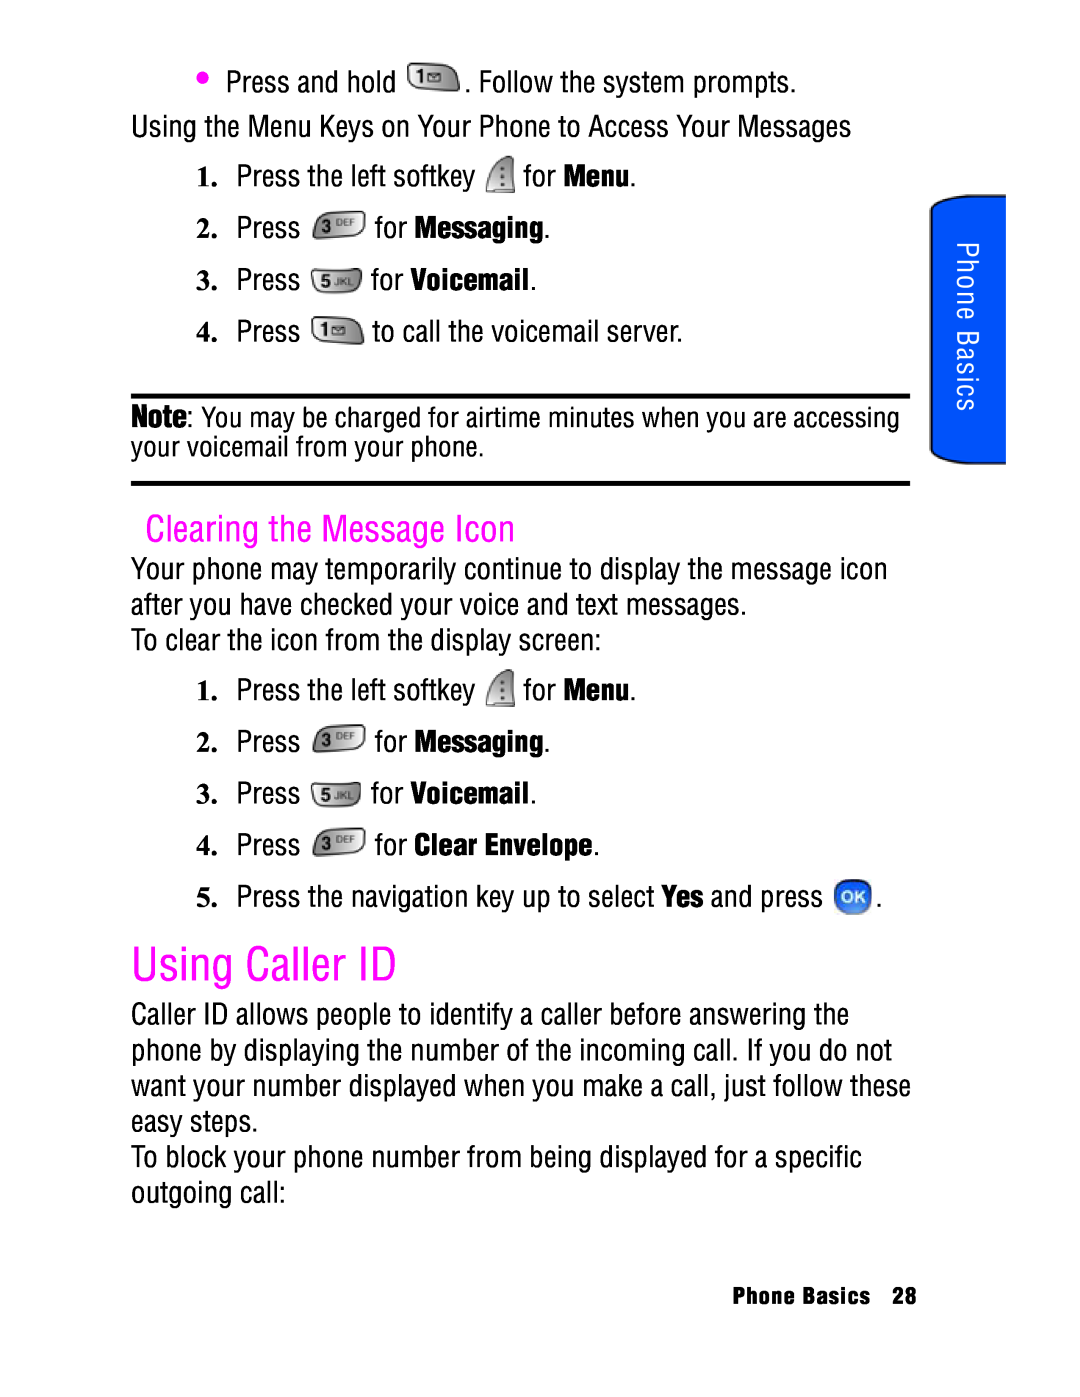 Samsung SPH-a740 manual Using Caller ID, Clearing the Message Icon, Press for Clear Envelope, Phone Basics 